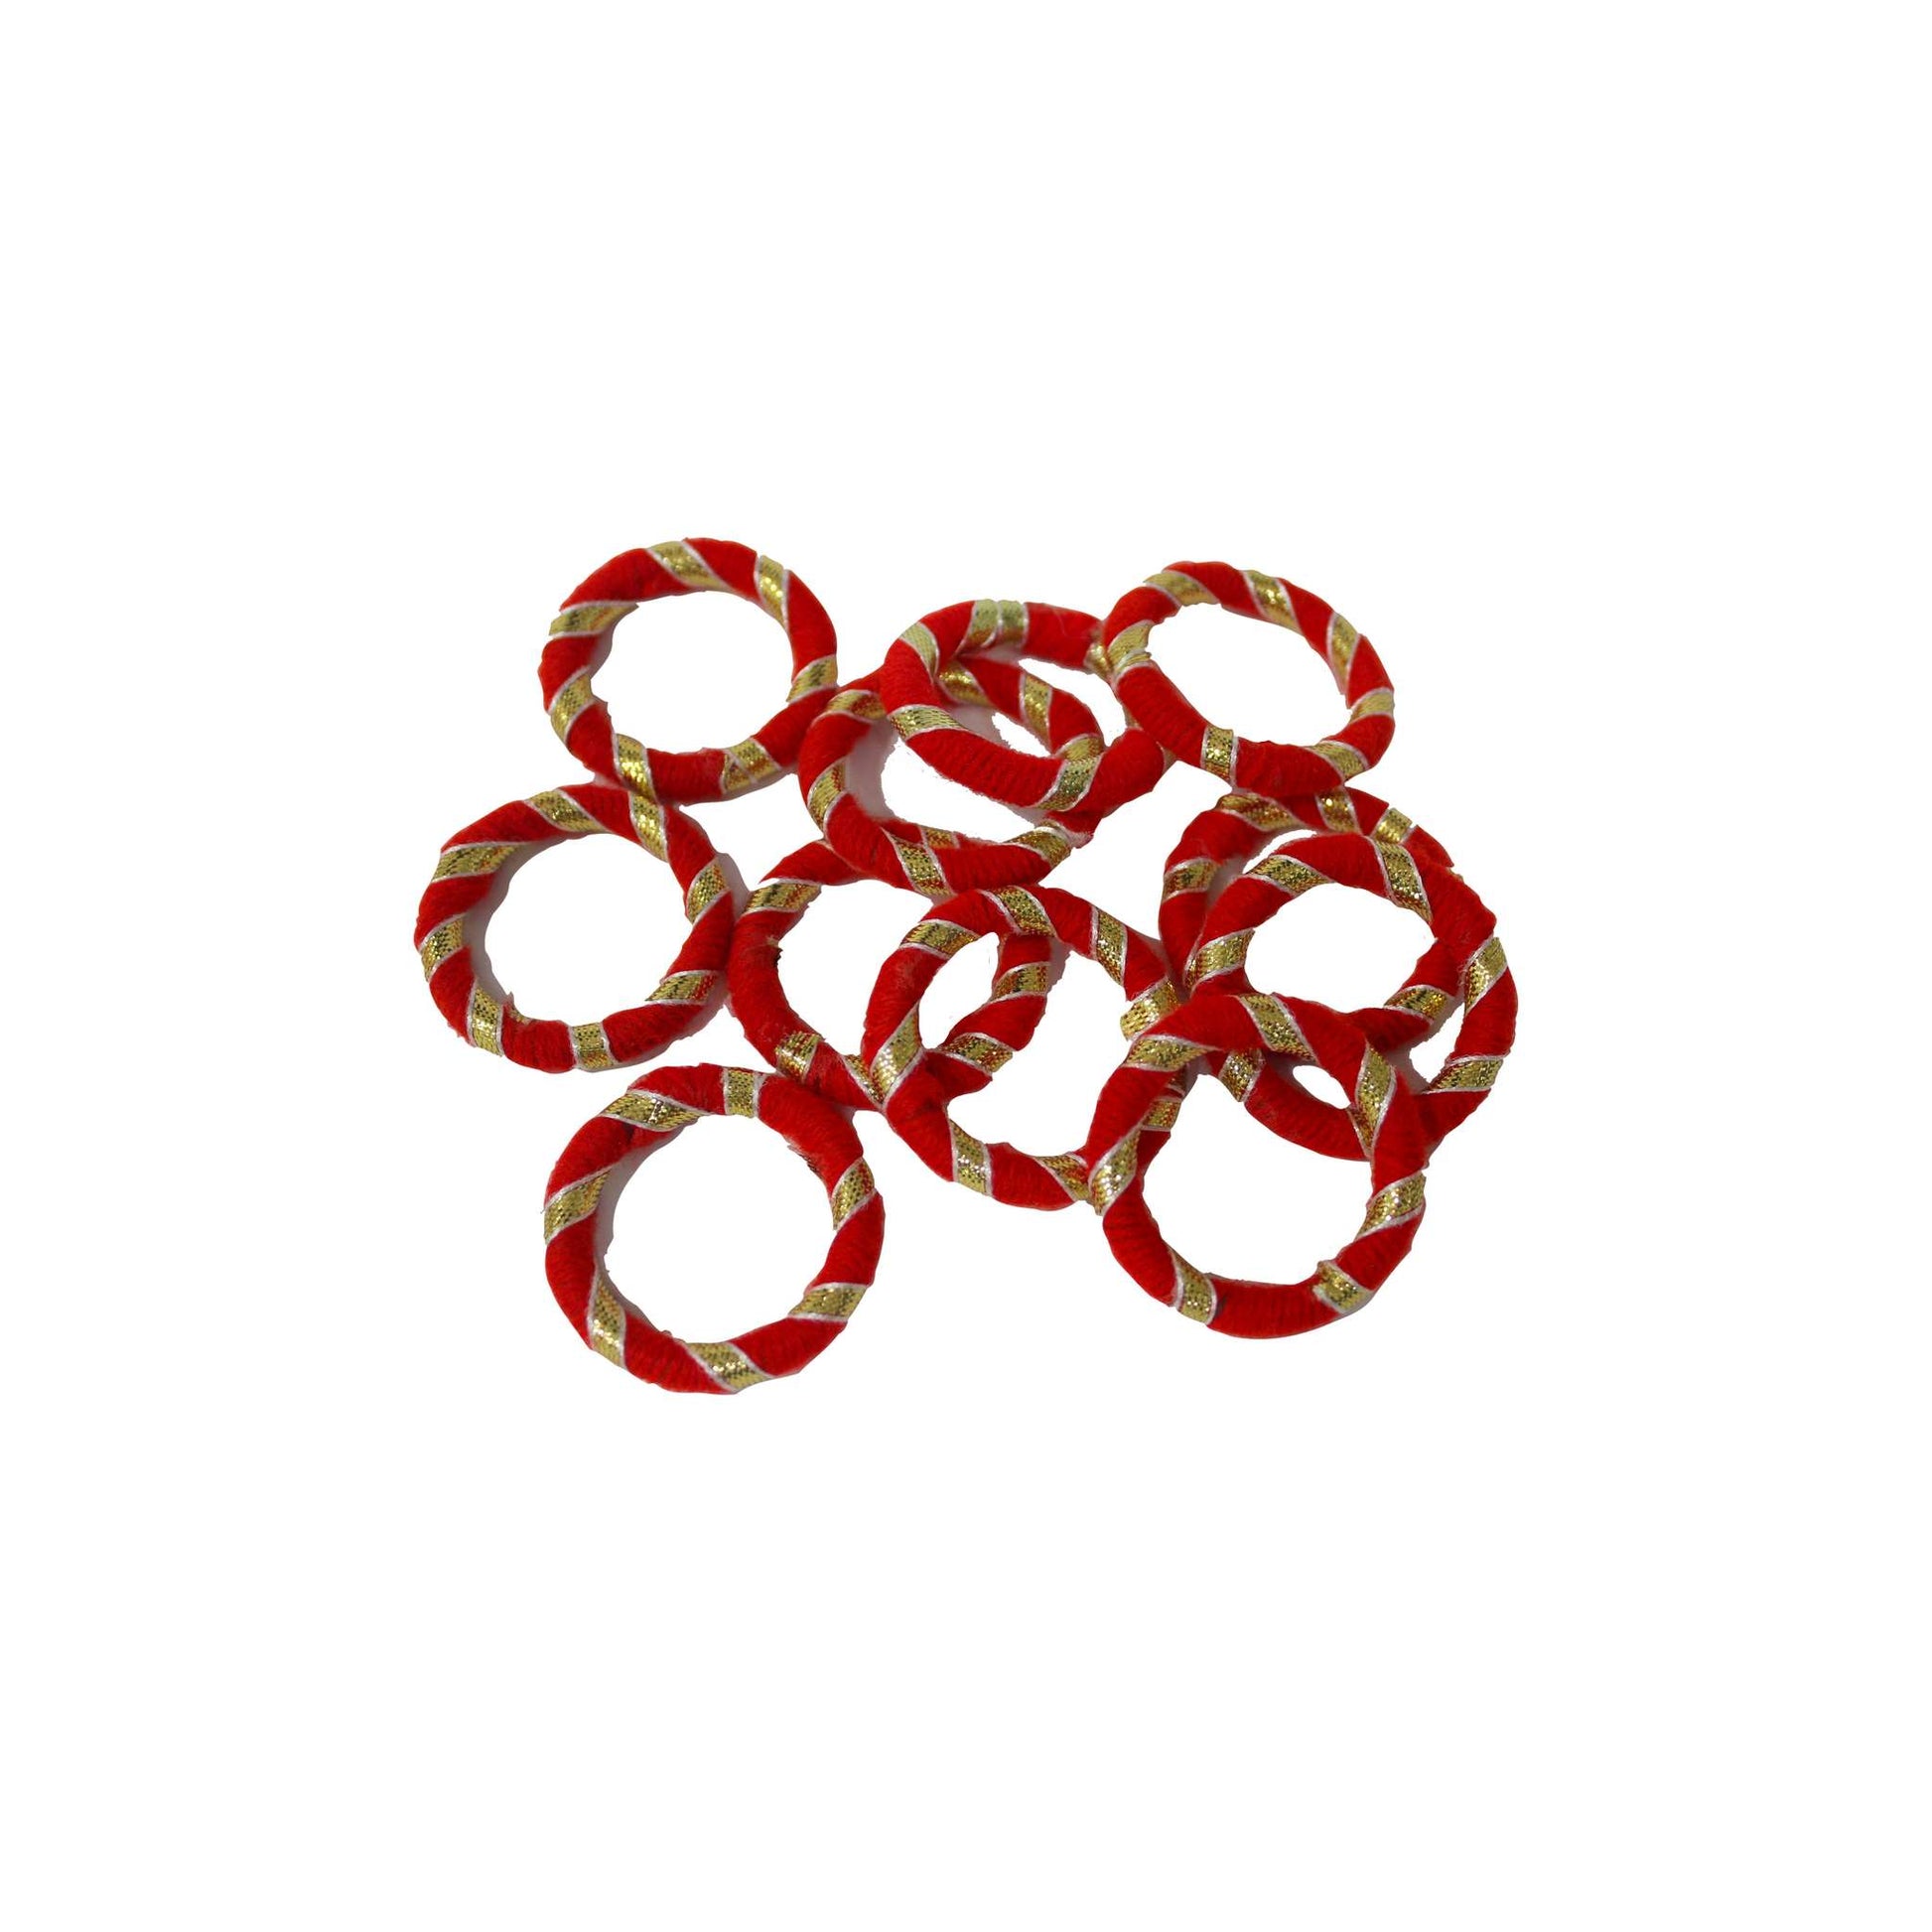 Indian Petals Threaded Round Bangle with Gota for Craft Rakhi Packing or Decoration, Medium - 11552, Red